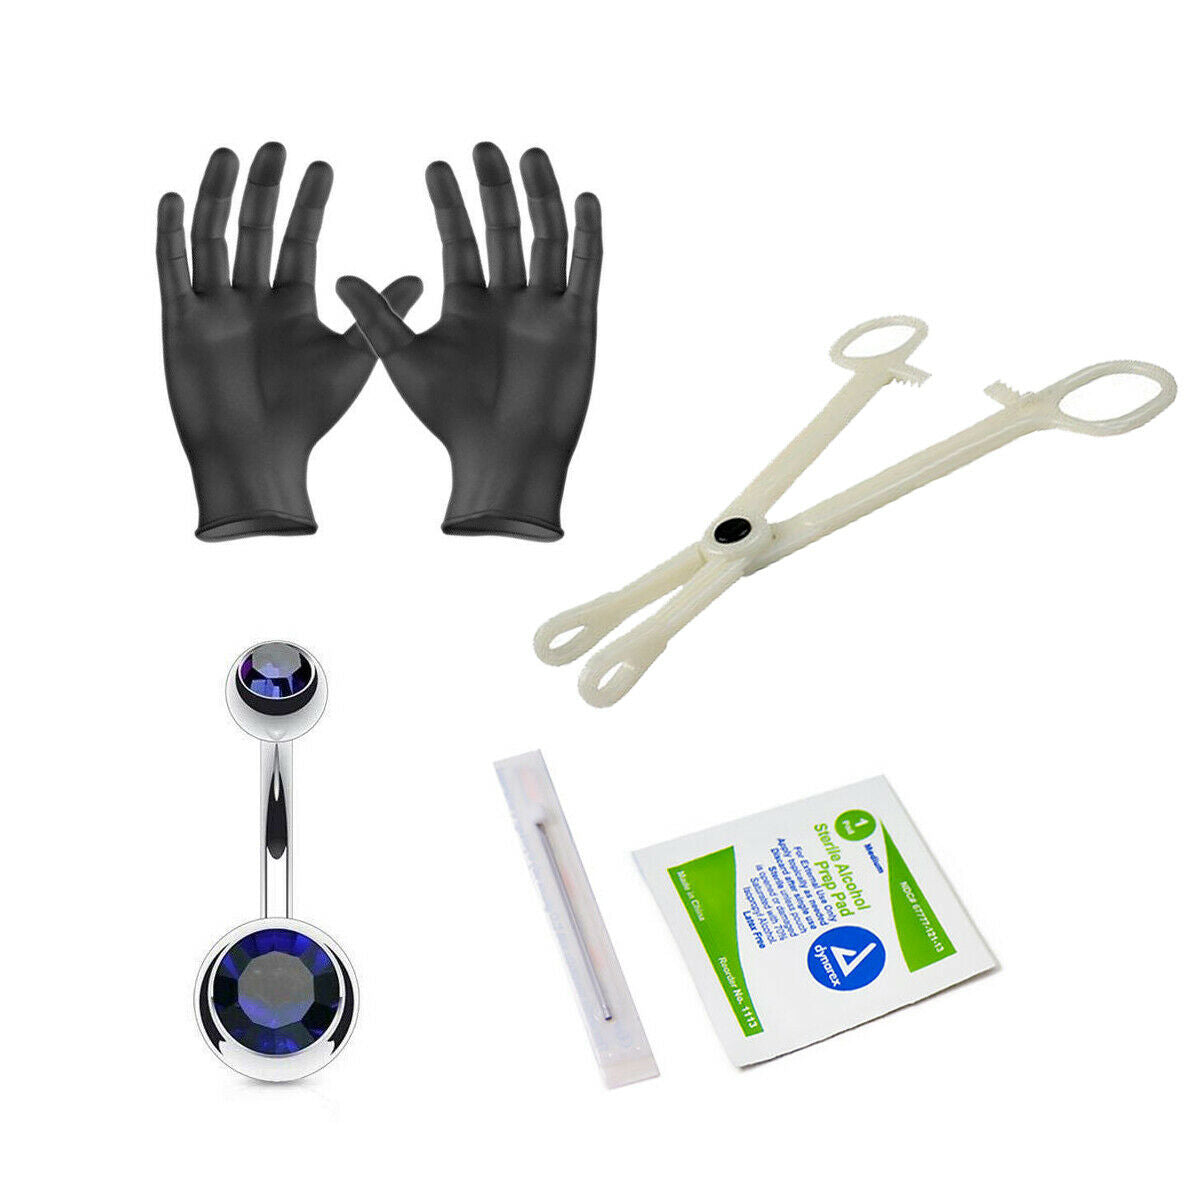 Body Piercing Kit Belly Ring 14 Gauge Clamps, Needles, Gloves And Jewelry